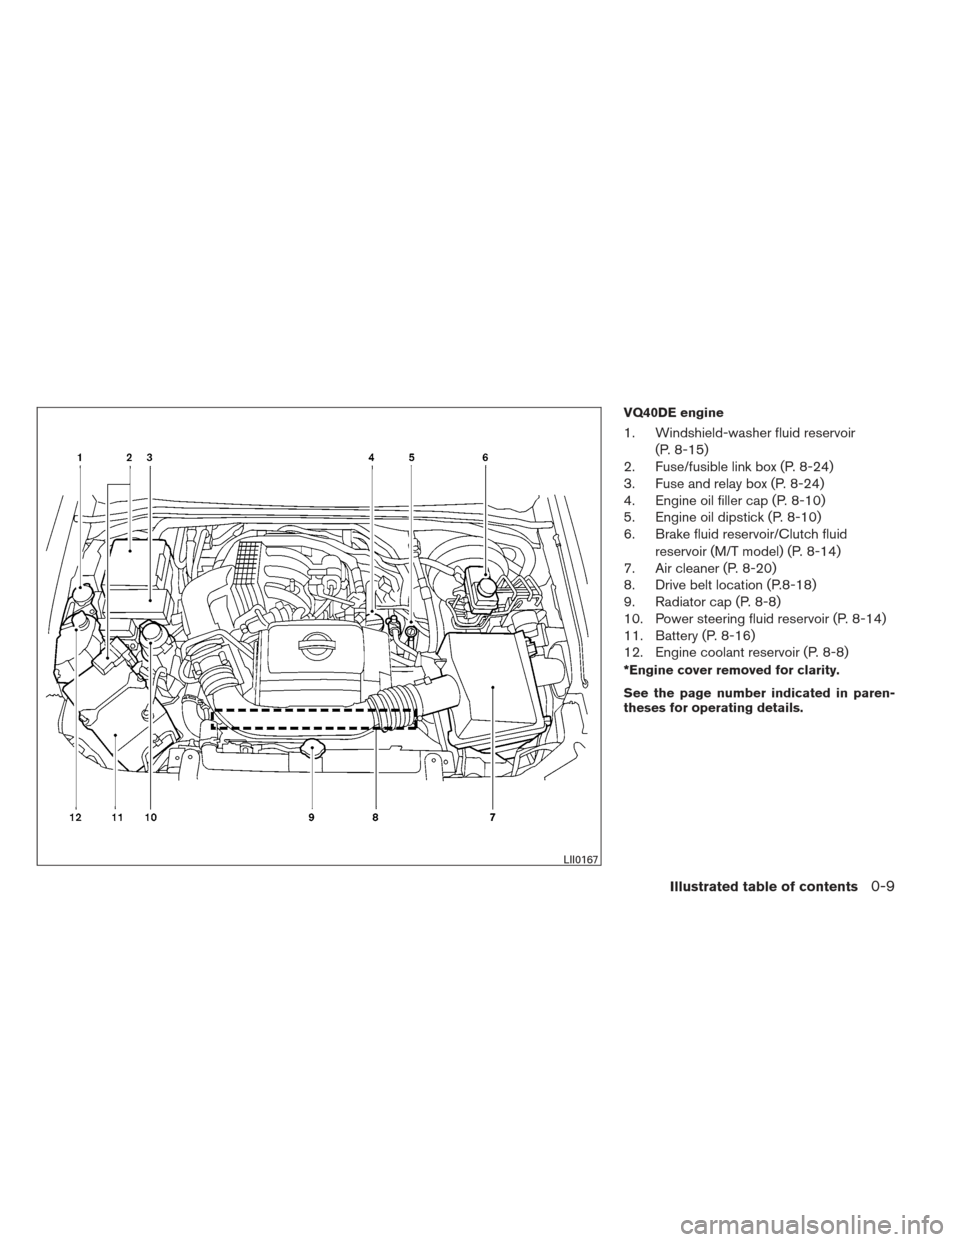 NISSAN FRONTIER 2013 D40 / 2.G User Guide VQ40DE engine
1. Windshield-washer fluid reservoir(P. 8-15)
2. Fuse/fusible link box (P. 8-24)
3. Fuse and relay box (P. 8-24)
4. Engine oil filler cap (P. 8-10)
5. Engine oil dipstick (P. 8-10)
6. Br